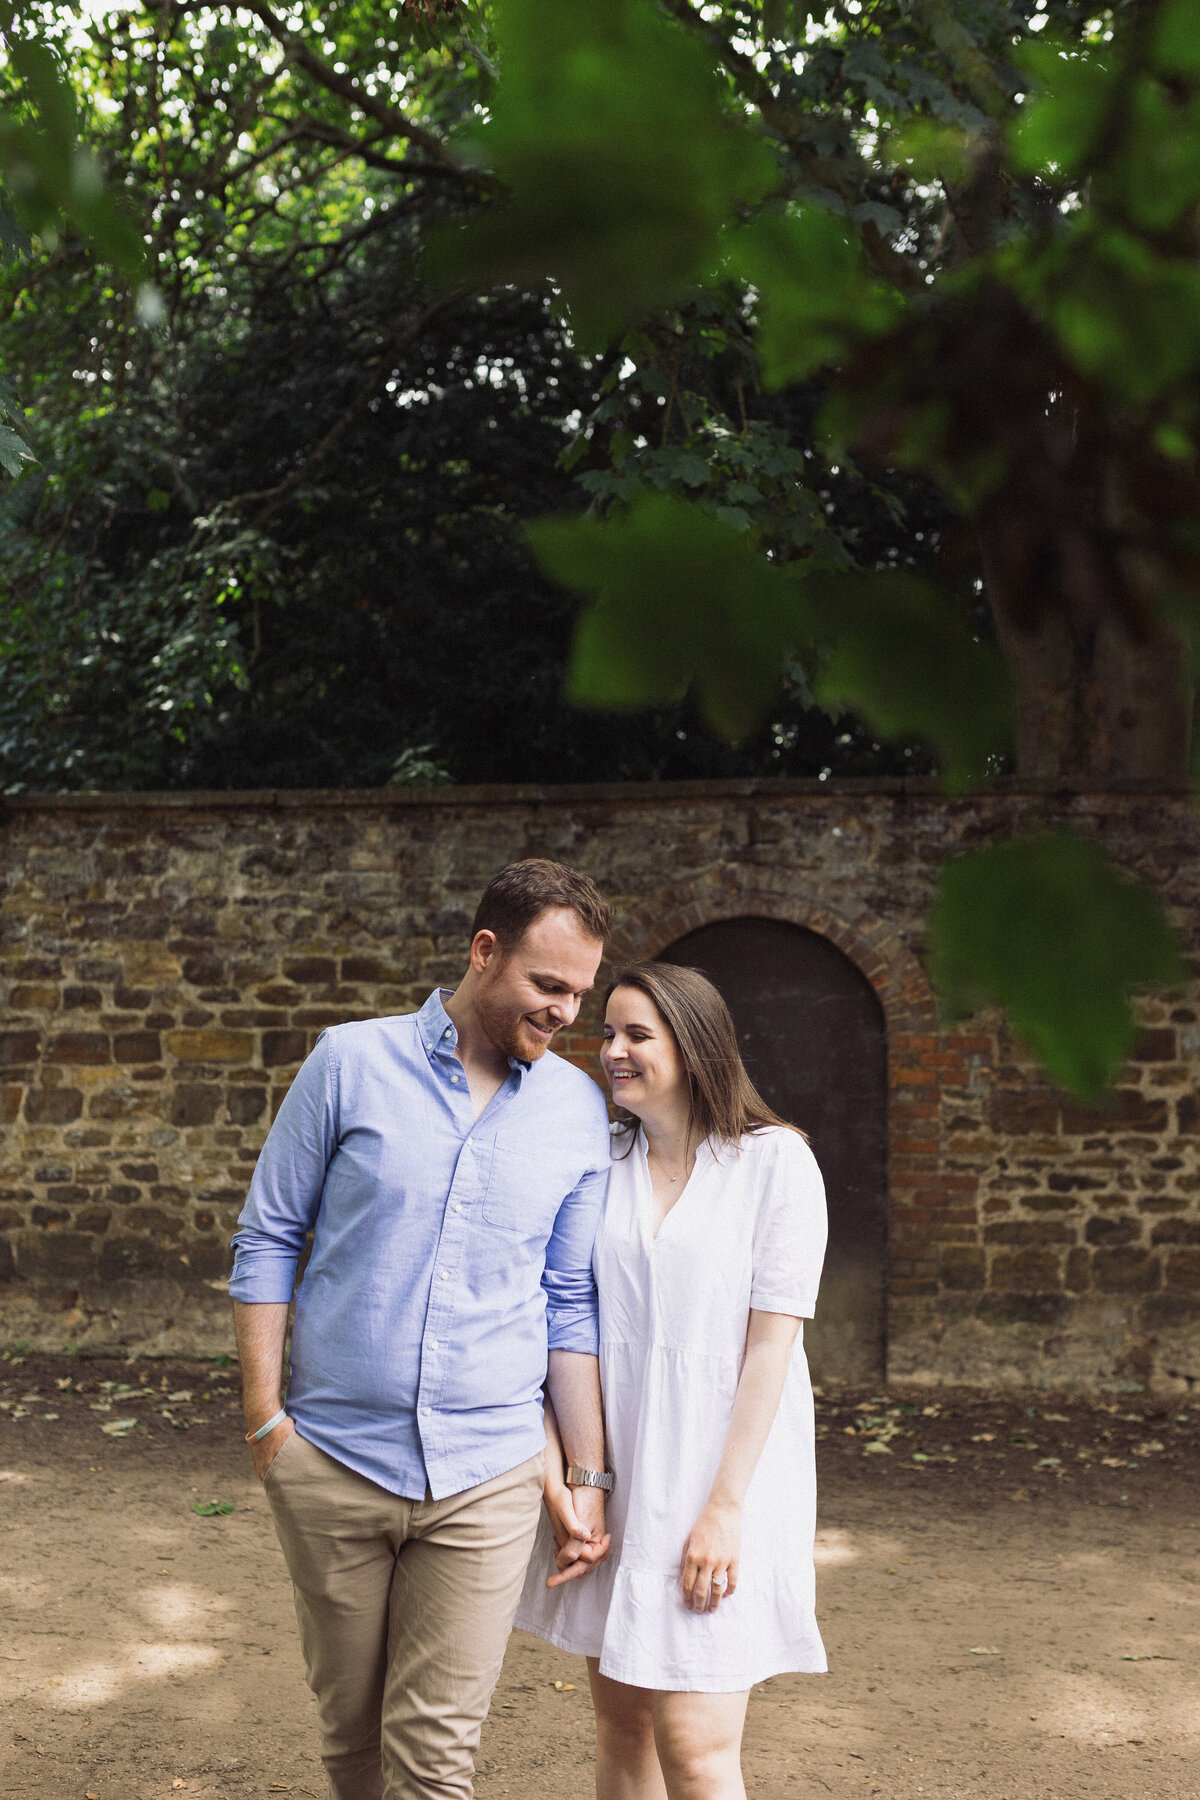 Amy Cutliffe Photography (136)